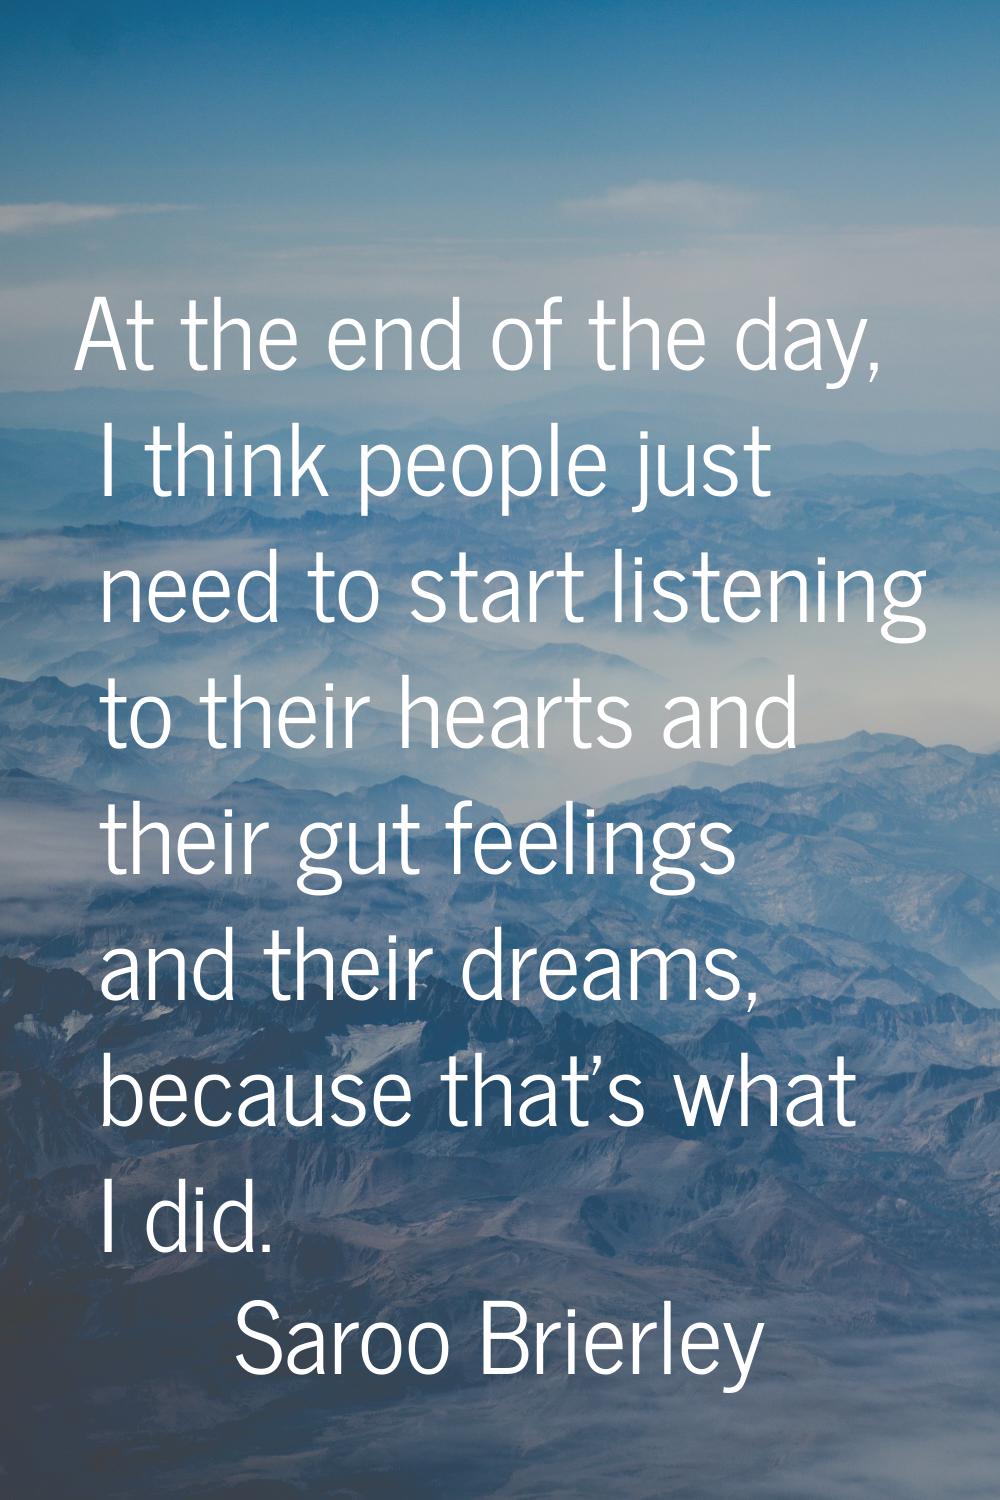 At the end of the day, I think people just need to start listening to their hearts and their gut fe